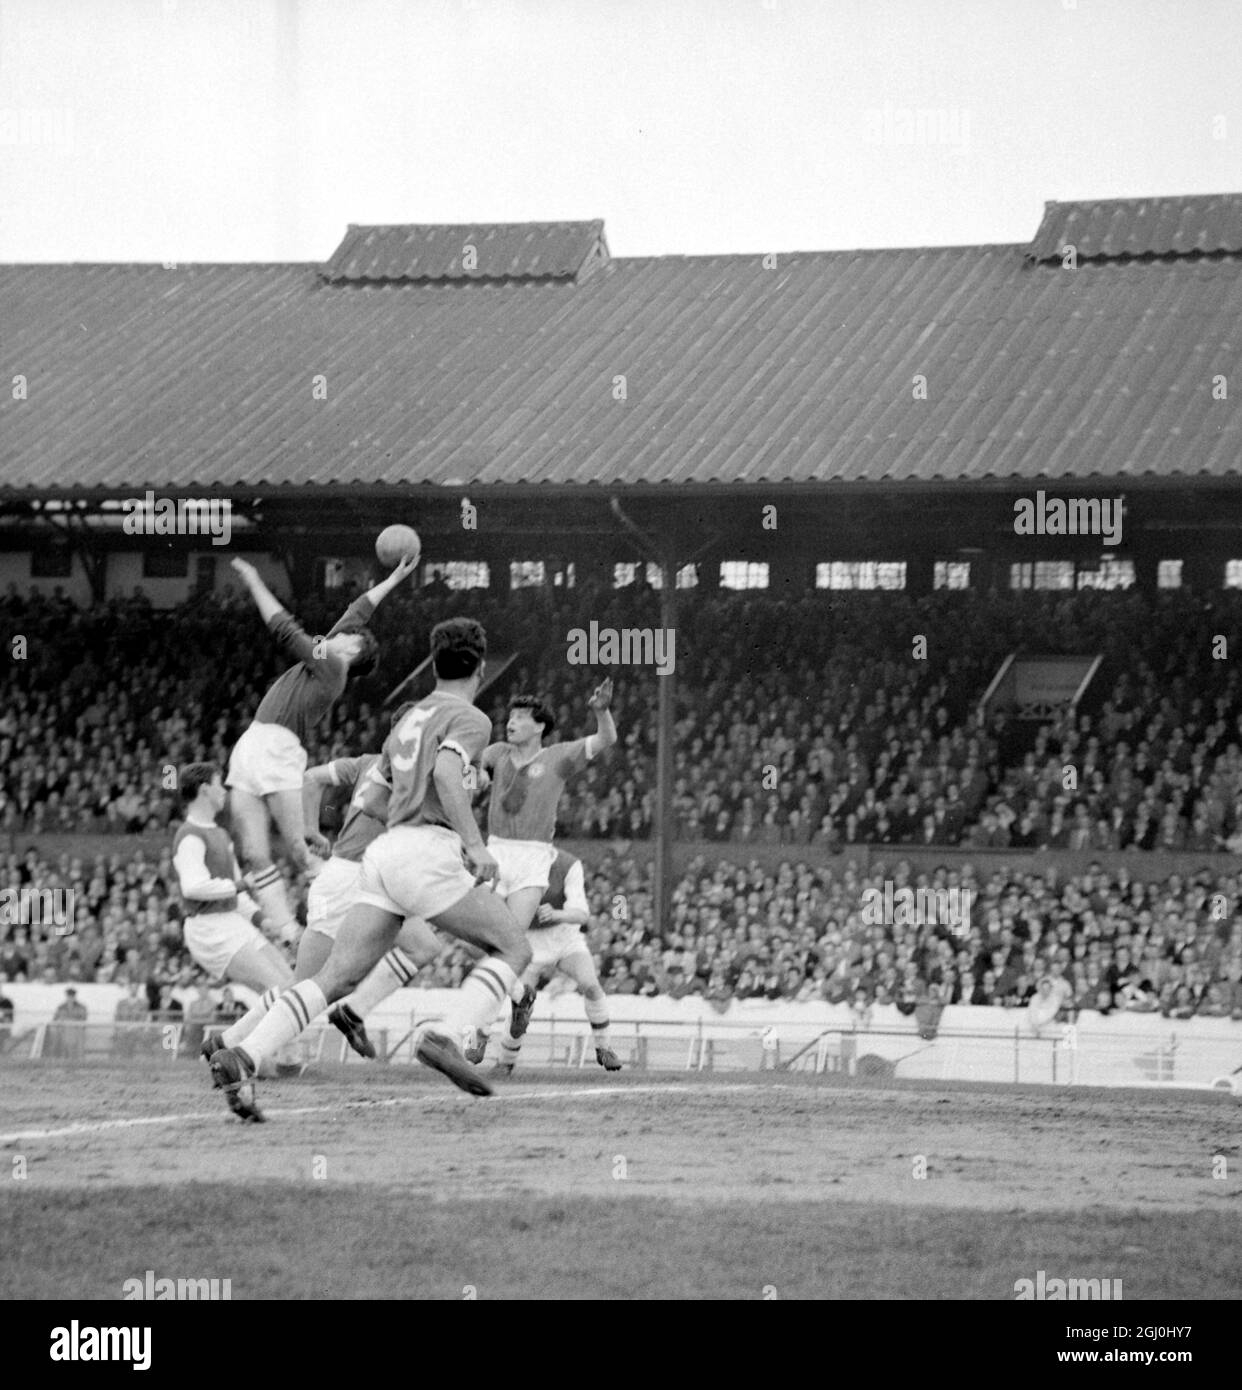 London: Chelsea goalie Bonetti leaps to save the ball during this afternoon's soccer game when Chelsea met Arsenal at Stamford bridge. Also shown is Chelsea centre-half Scott (No 5) with back to the camera who partly hides Chelsea's right-back J. Sillet. 15 April 1961 Stock Photo